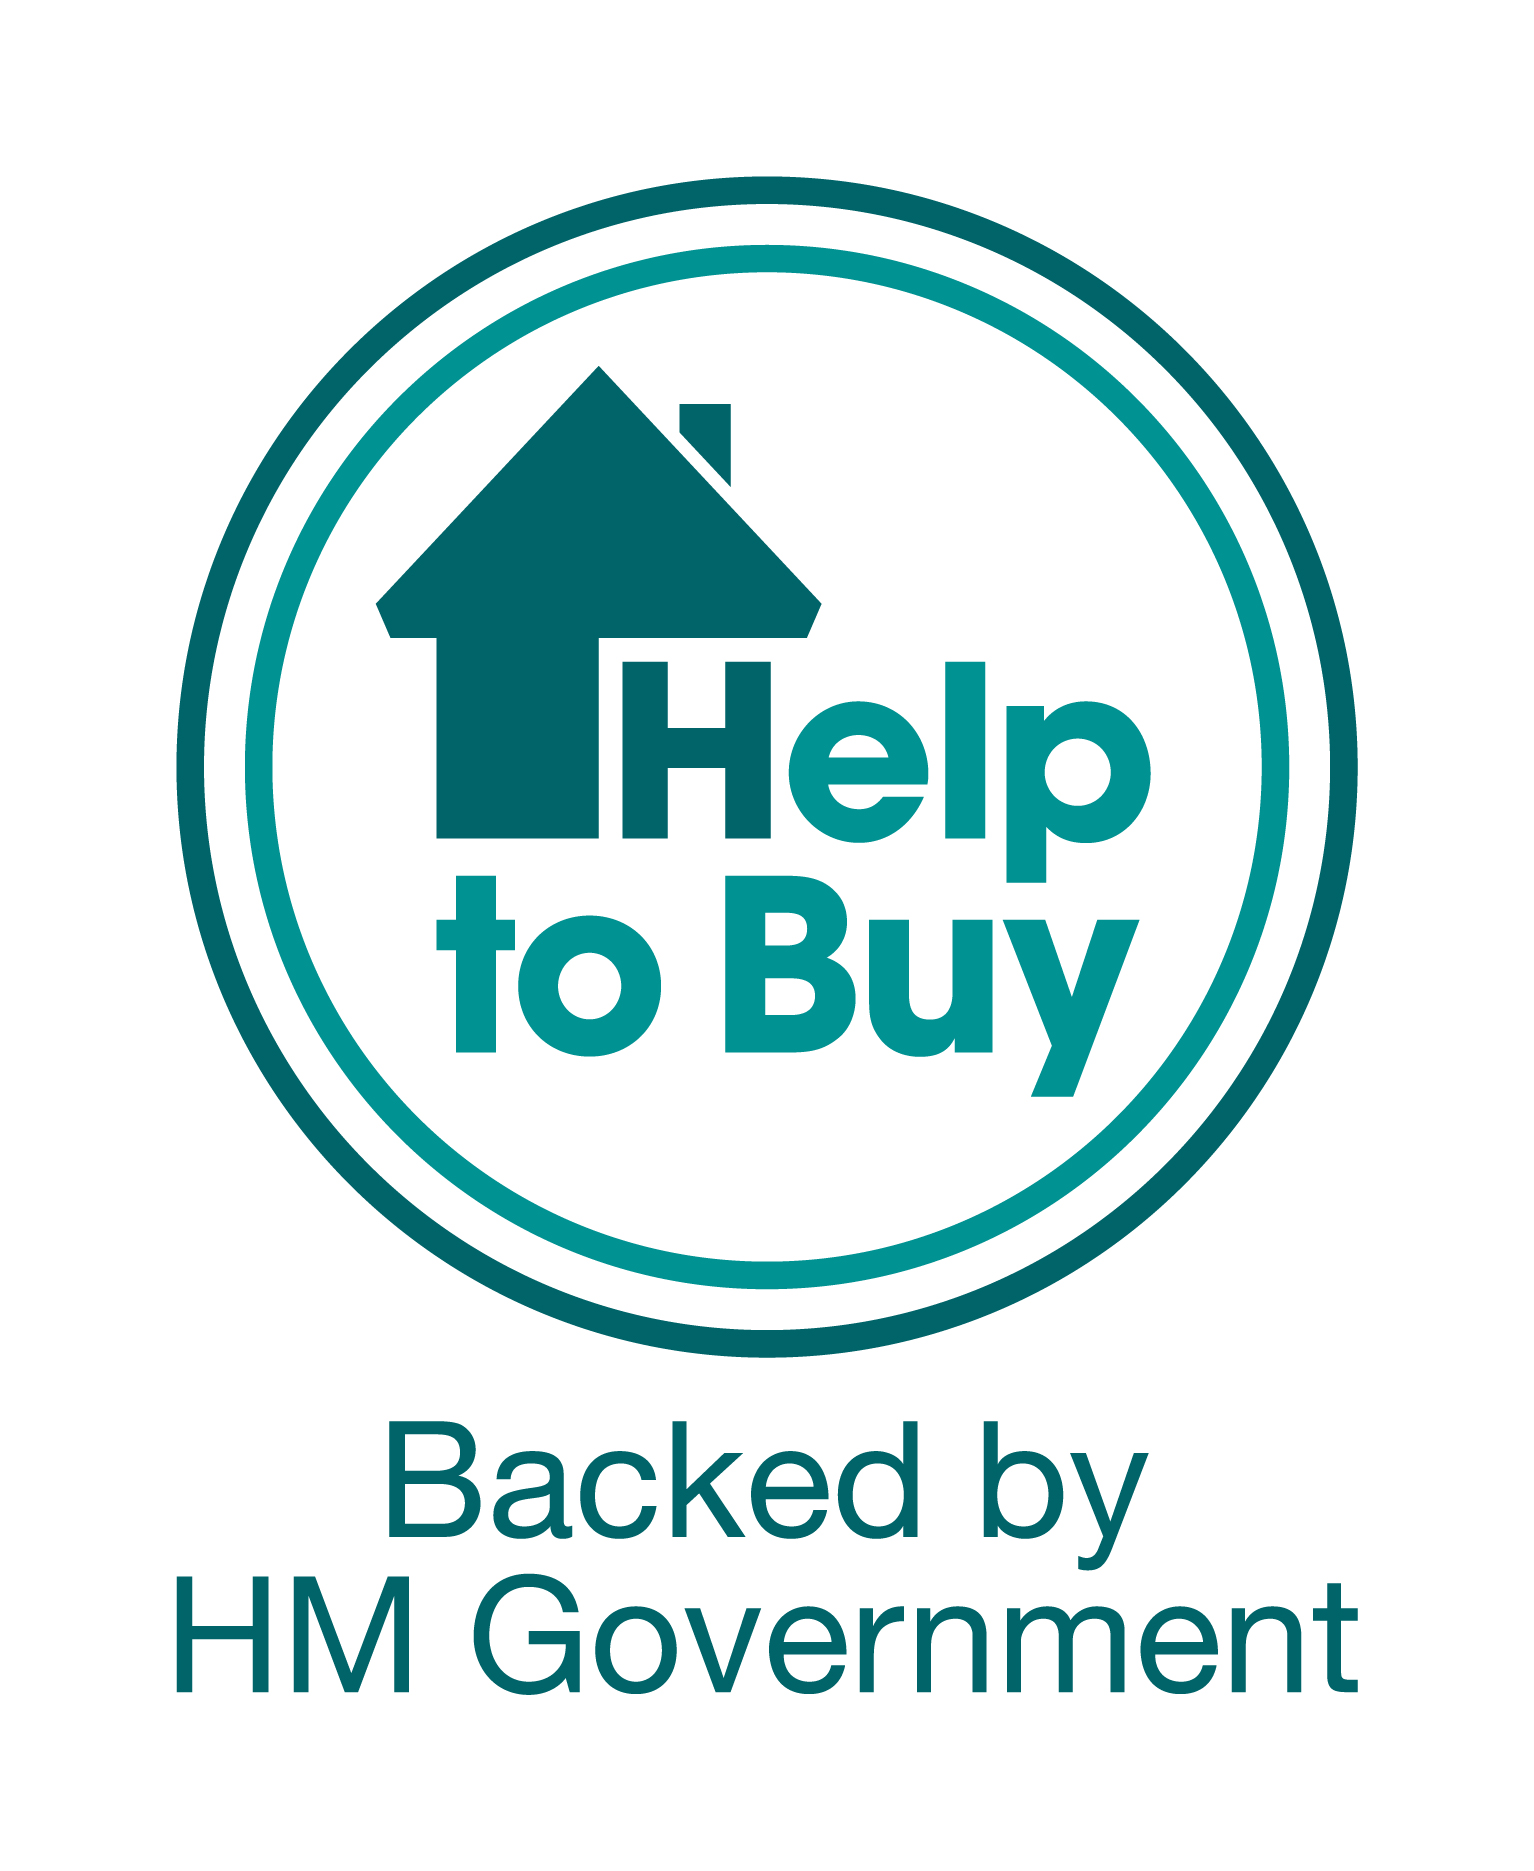 Help to buy backed by HM Government